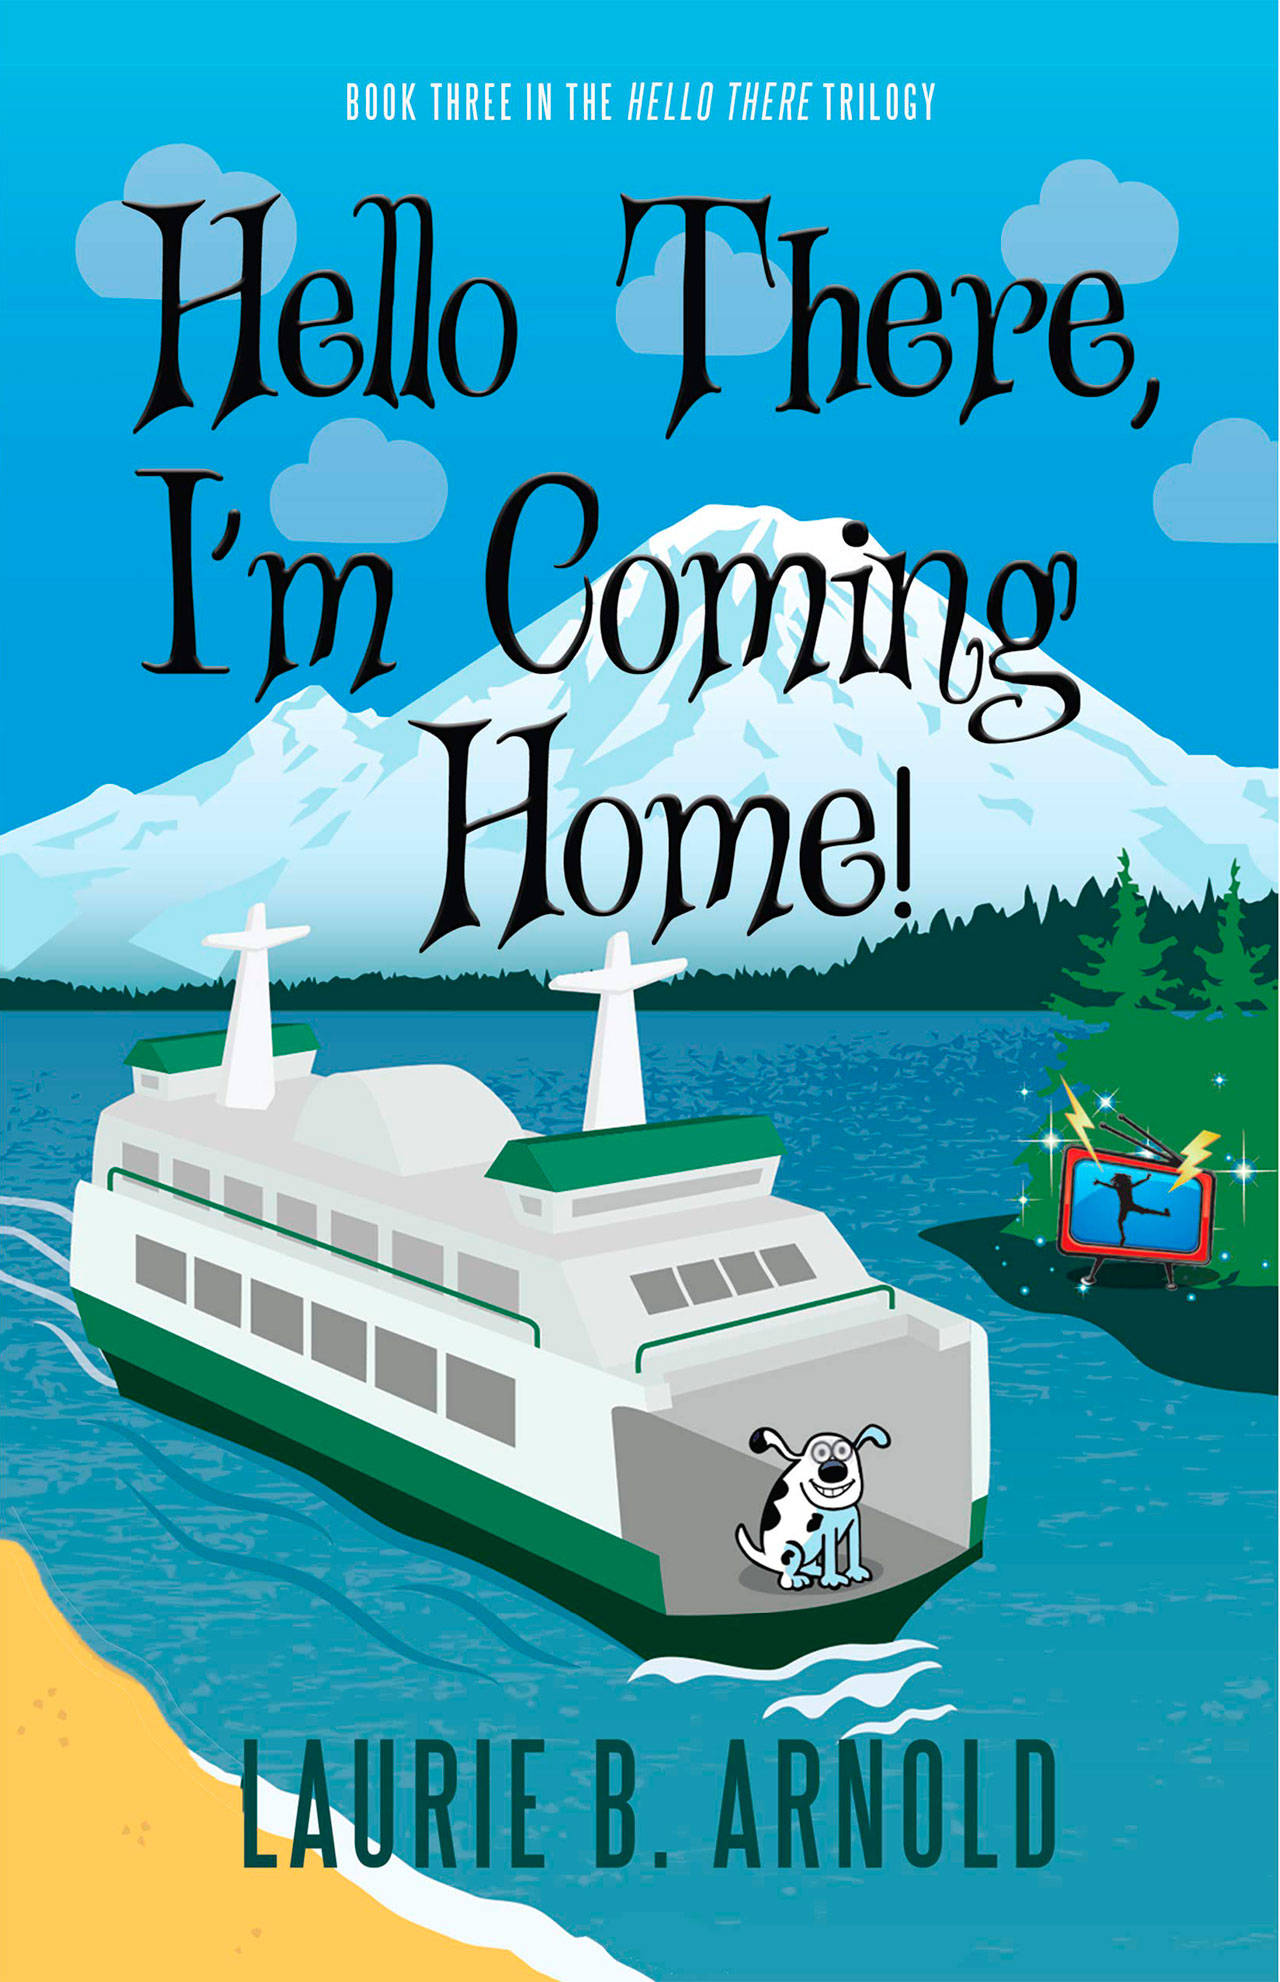 Image courtesy of Prospecta Press | Bainbridge Island author Laurie B. Arnold’s final book in the “Hello There” trilogy is available now.